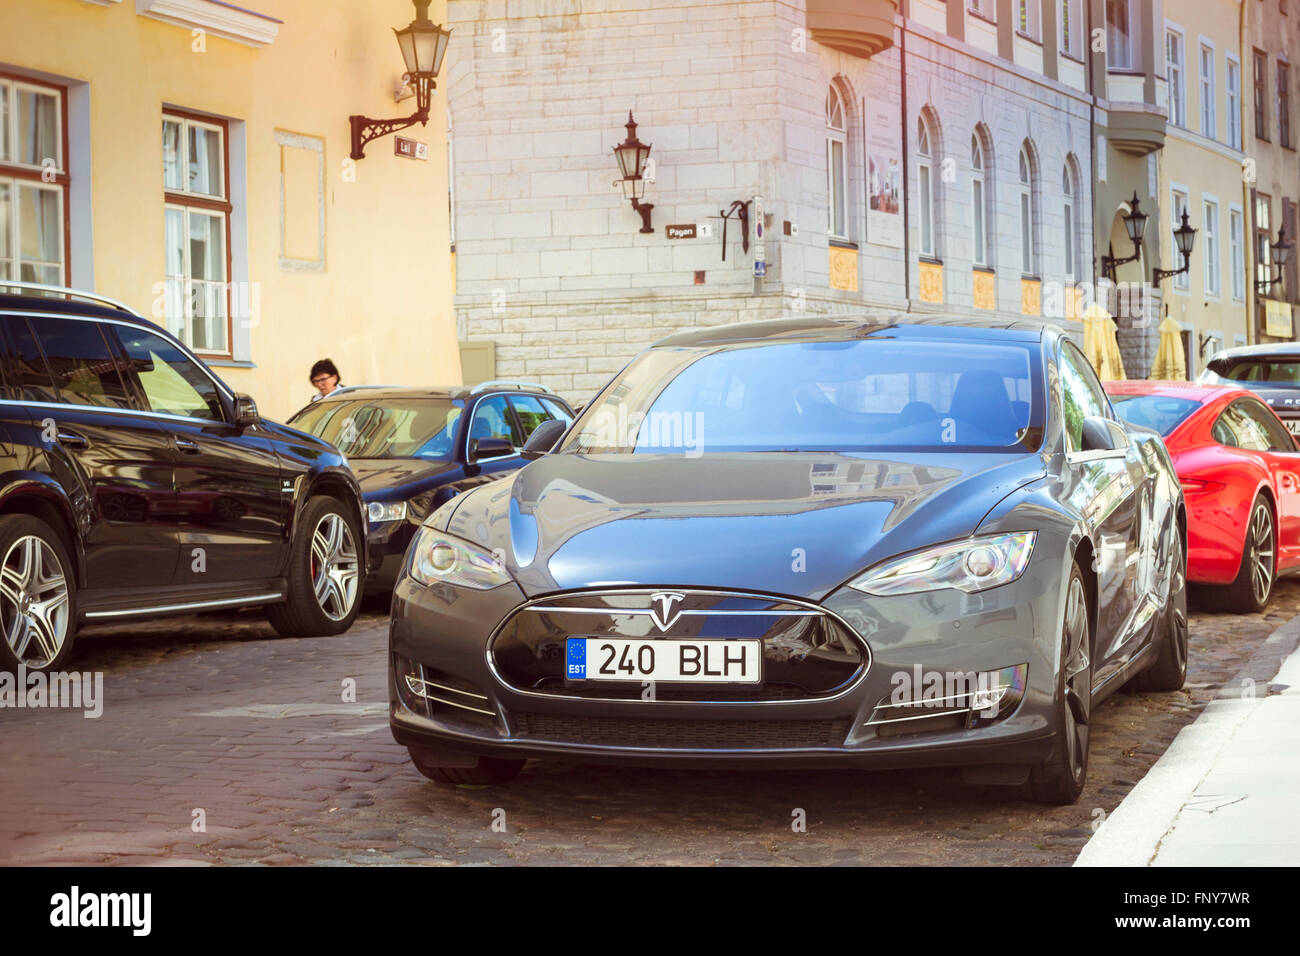 Tallinn, Estonia - June 12, 2015: Electric car, manufactured by Tesla  motors, parked near the curb on a paved street of Tallinn Stock Photo -  Alamy